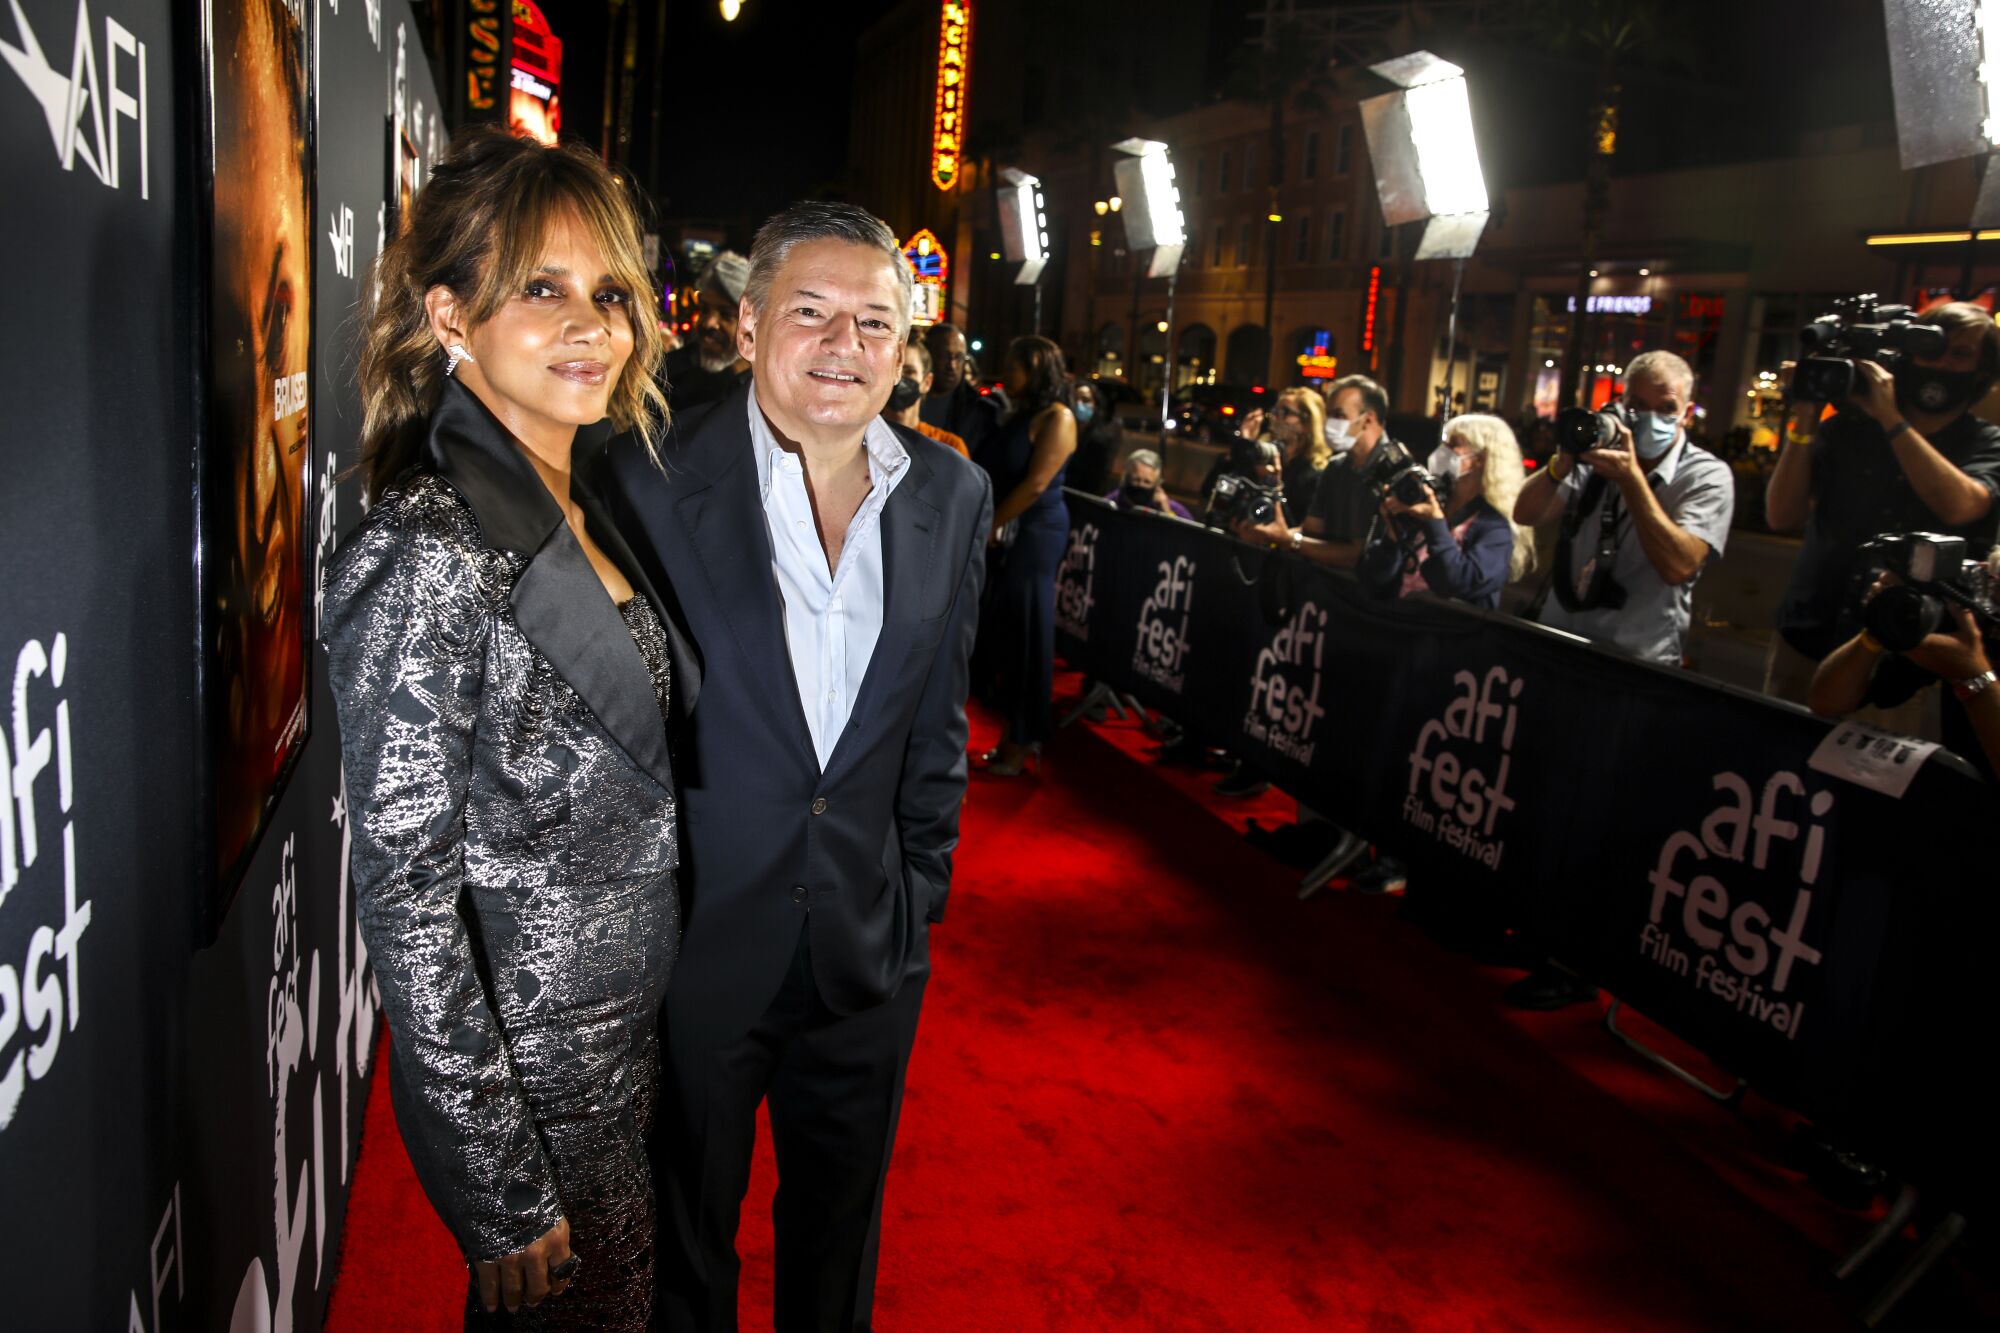 Halle Berry and Ted Serandos on the red carpet with photographers in the background